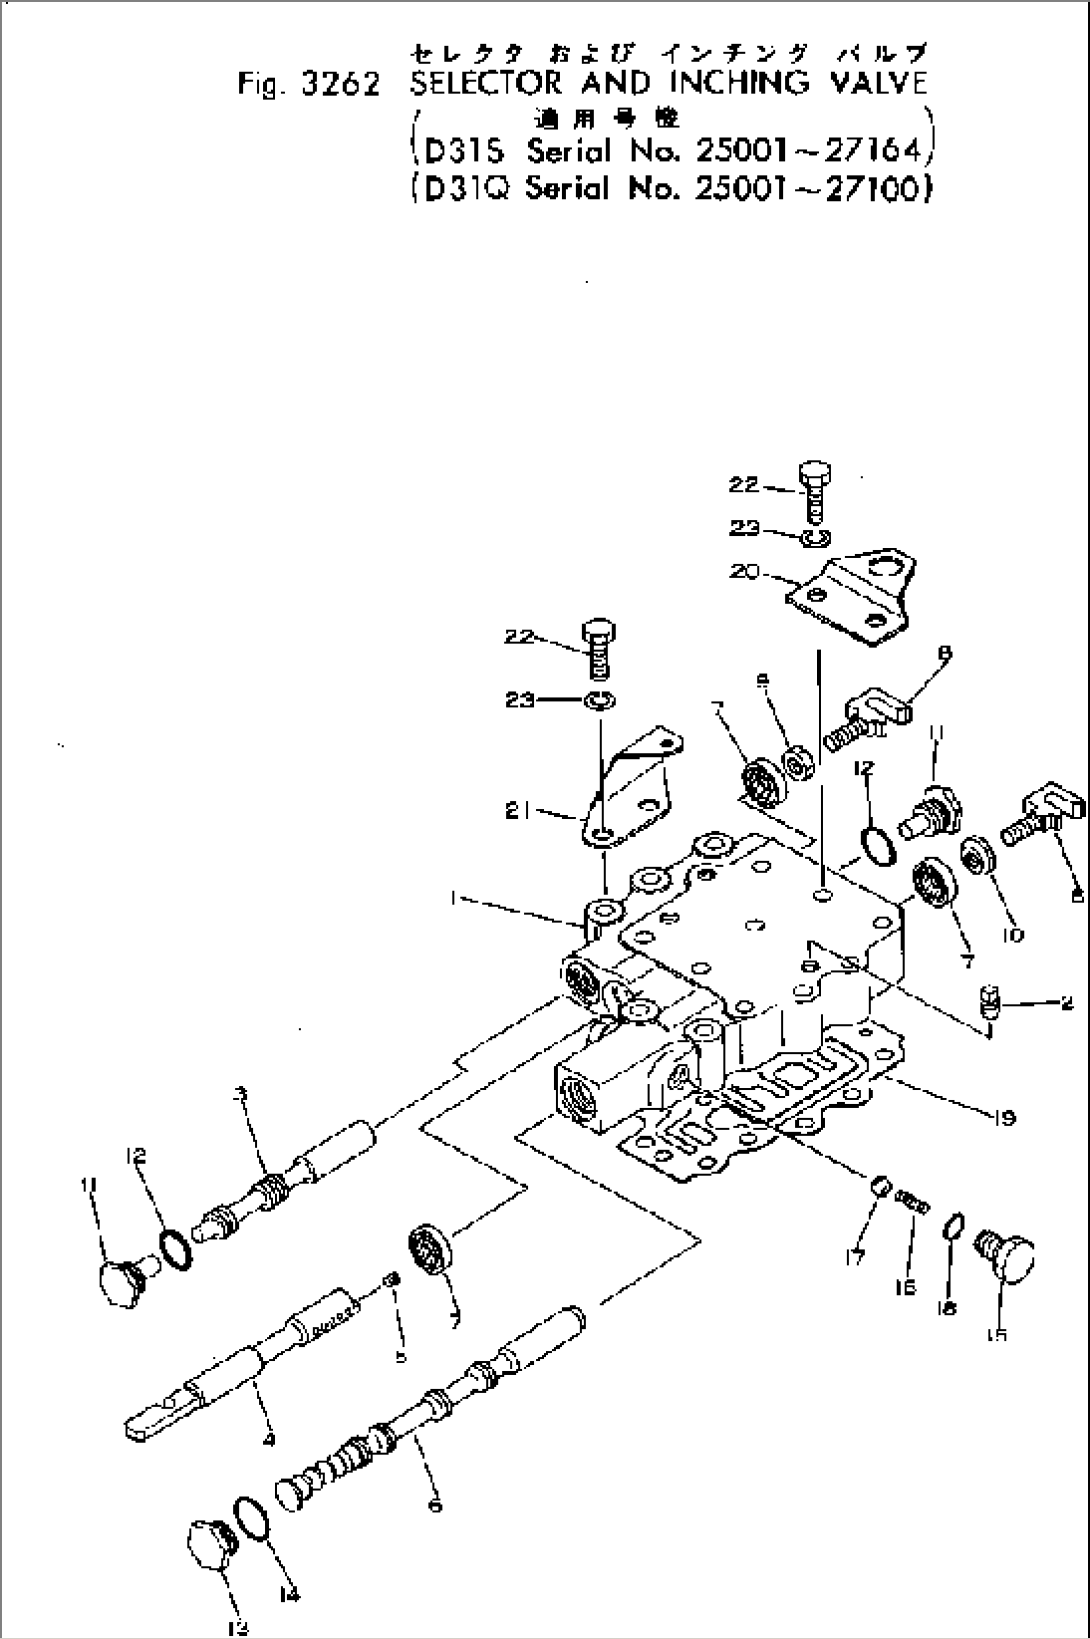 SELECTOR AND INCHING VALVE(#25001-27100)